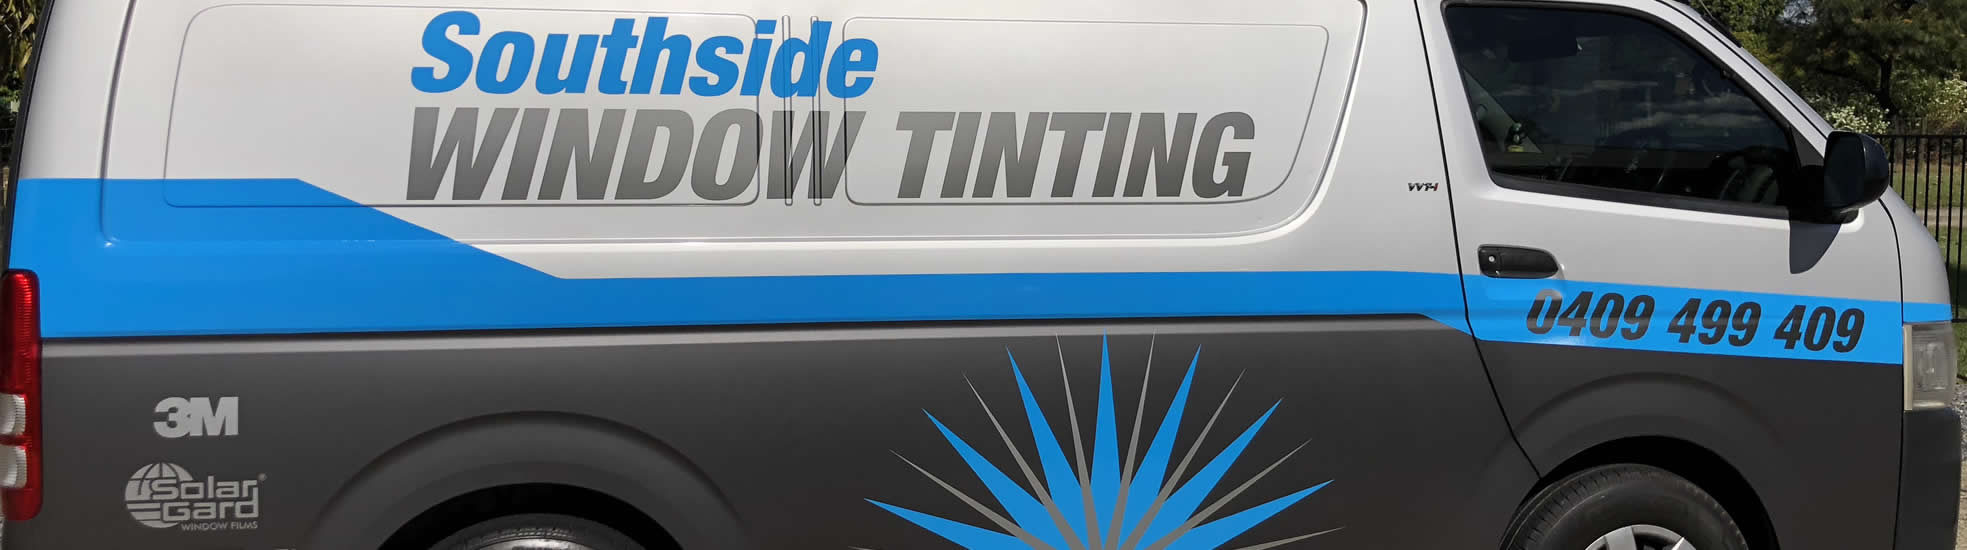 Southside Window Tinting come to you